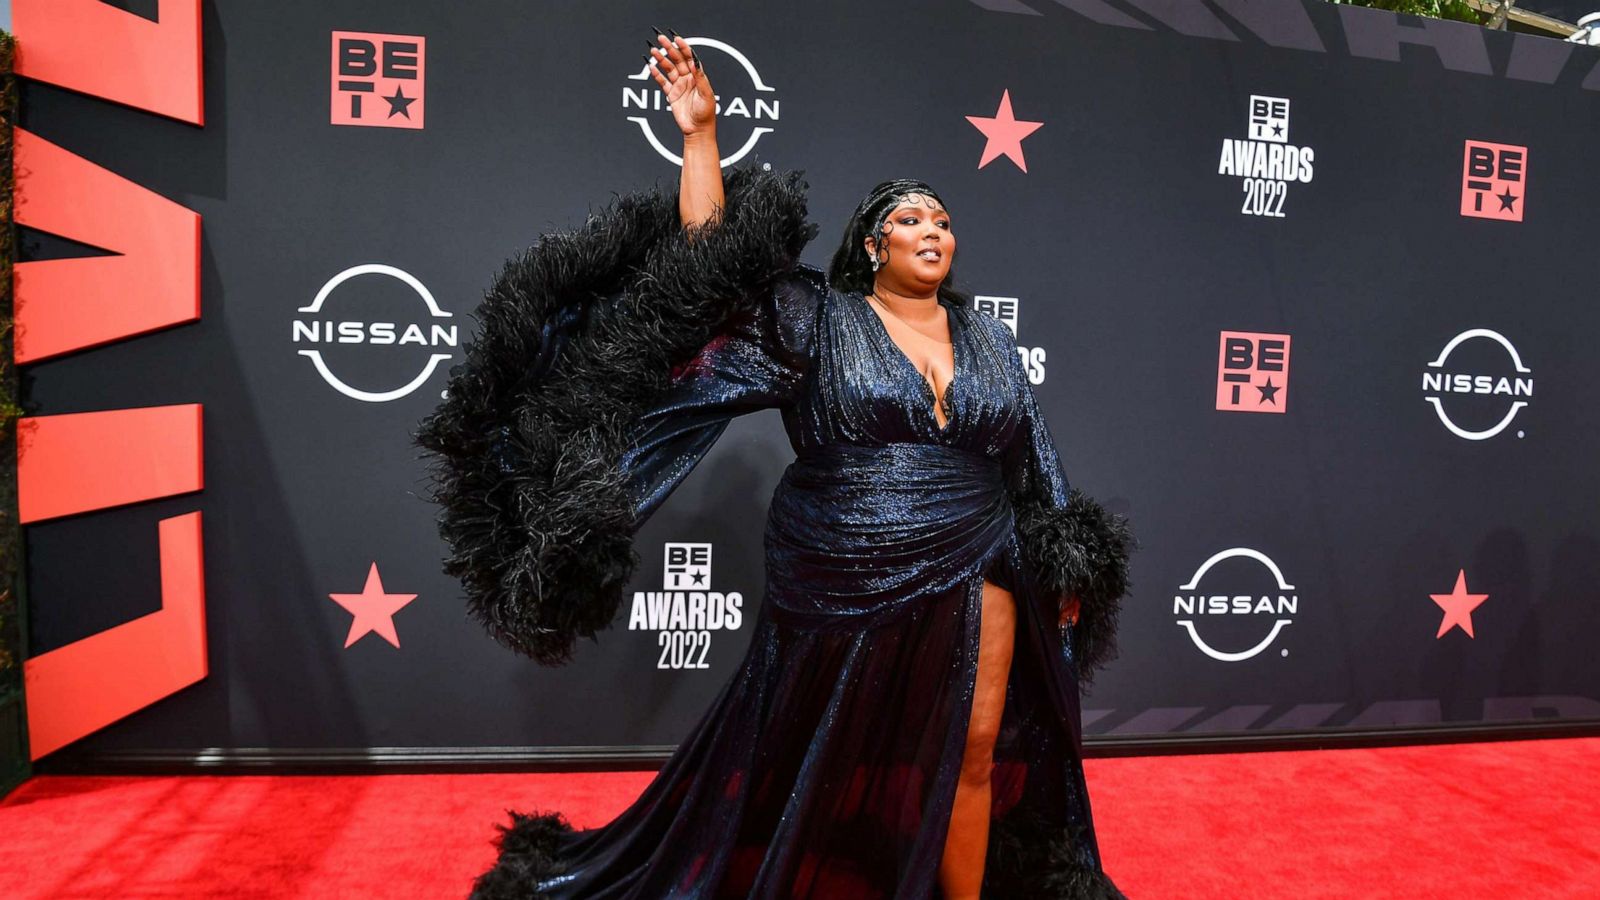 BET Awards 2022: Red carpet looks from Lizzo, Taraji P. Henson and more -  Good Morning America